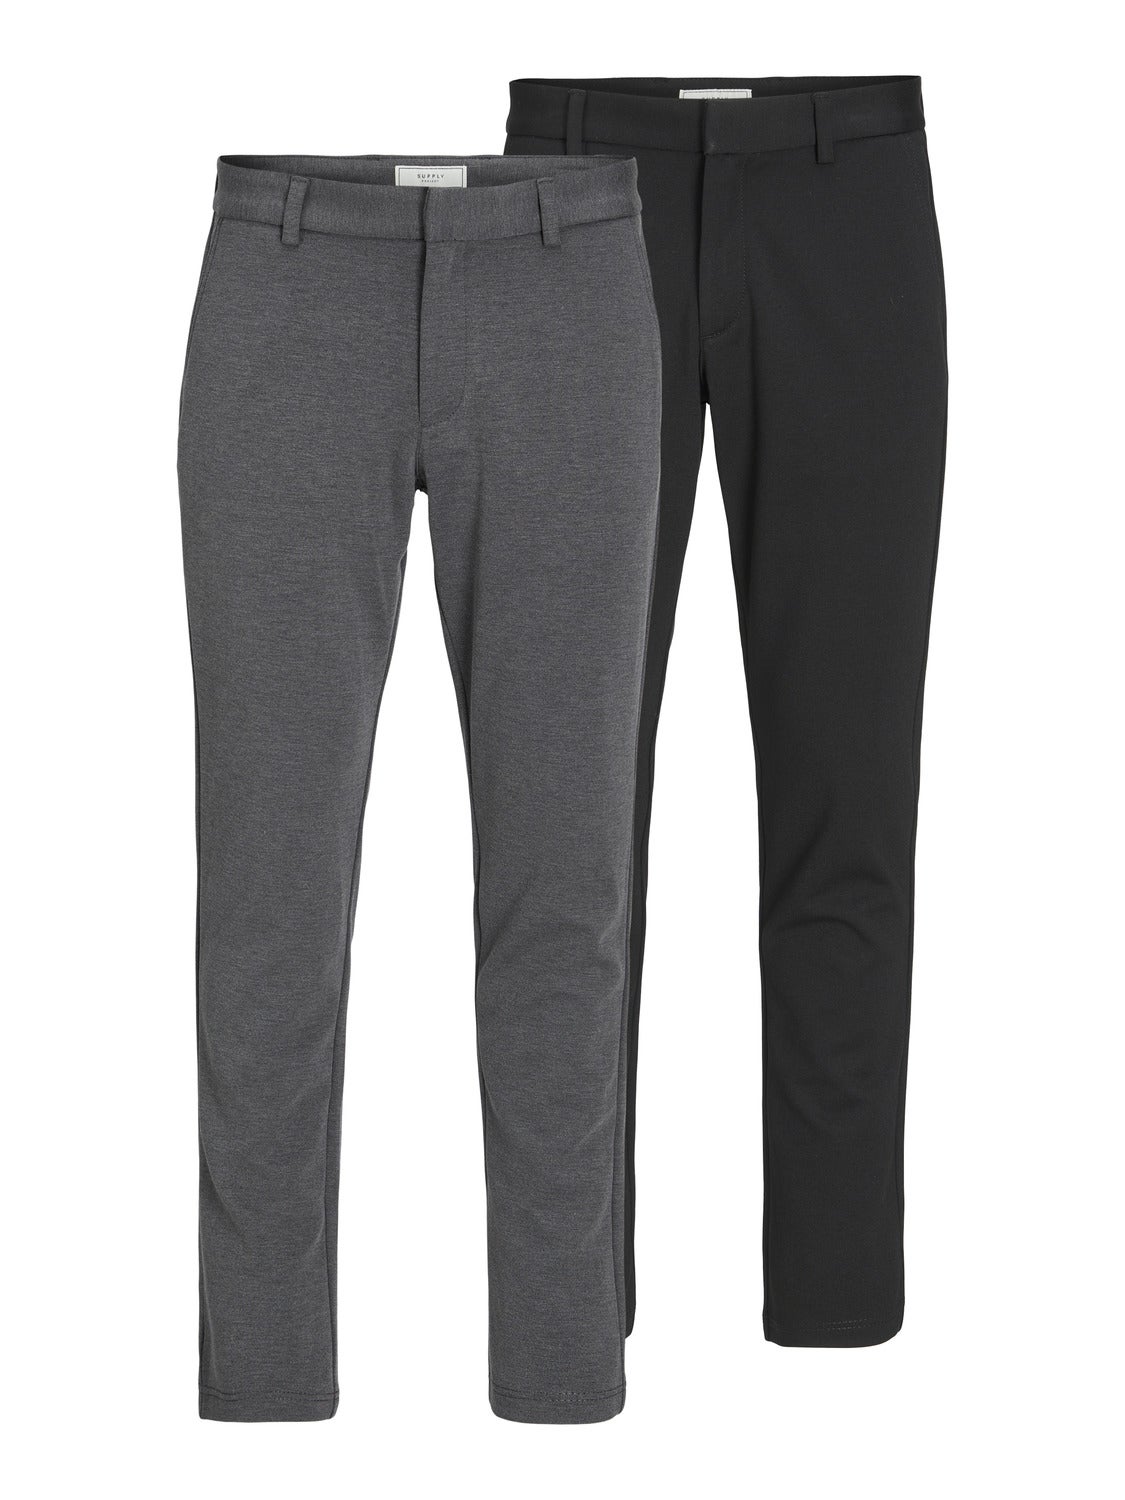 Men'S Trousers & Chinos ⋆ Cheap Clothing,Shoes Online Outlet Shop ⋆ Radical  Xicana